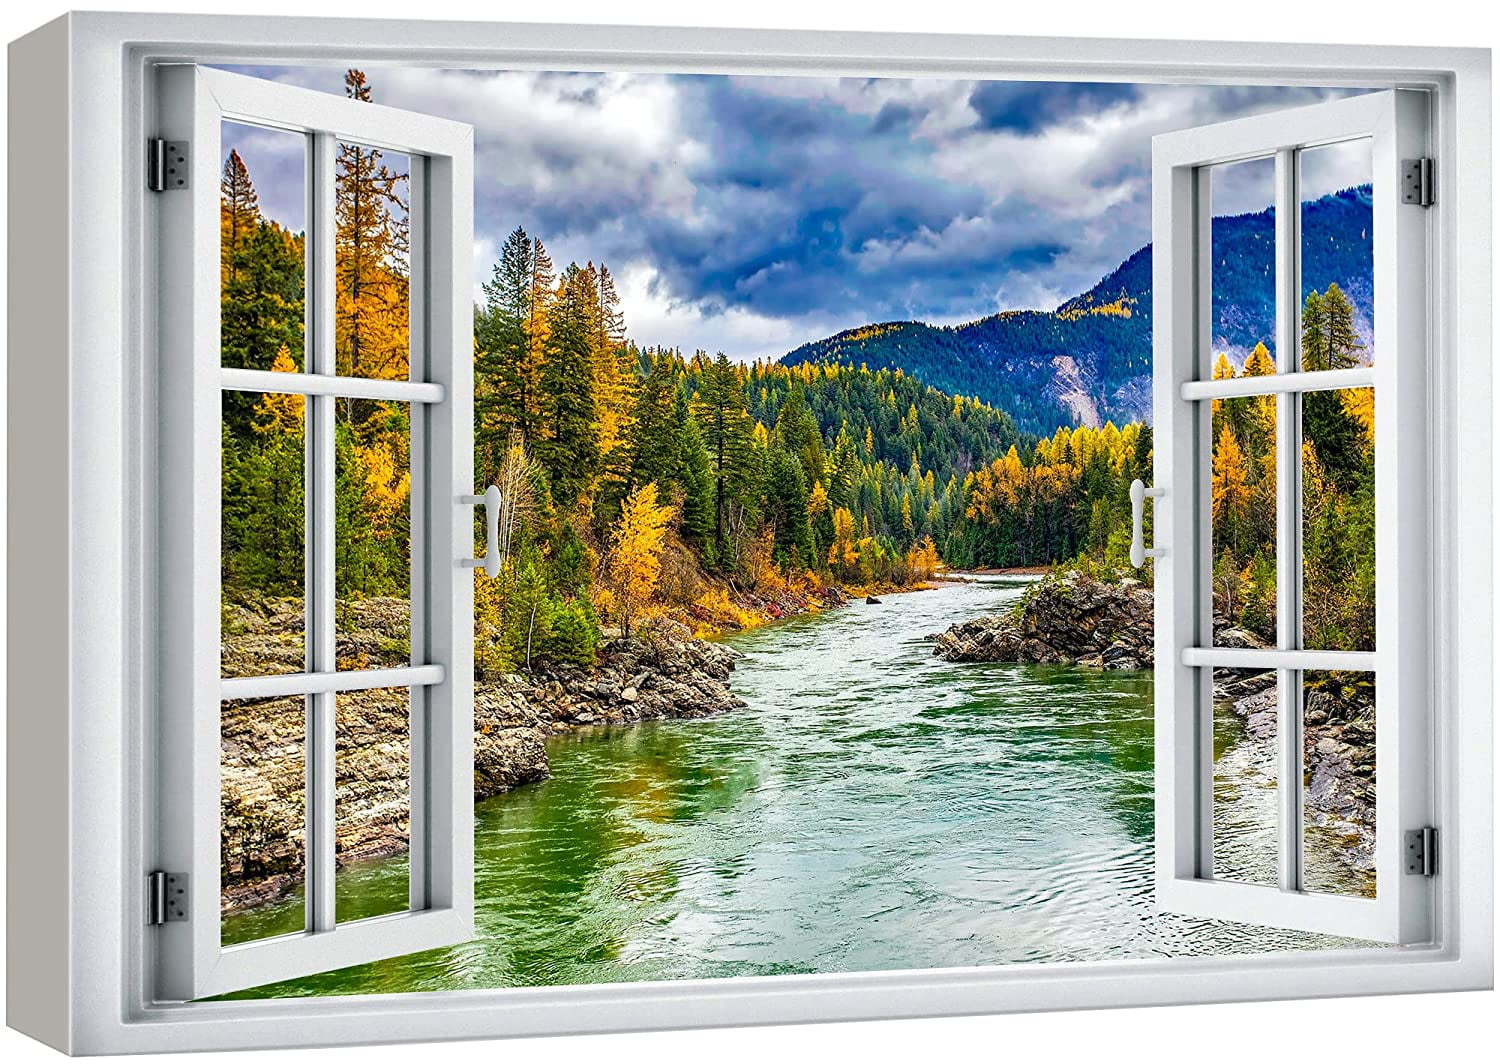 wall26 Canvas Print Wall Art Window View Autumn Forest River Stream  Mountains Wilderness Nature Photography Realism Scenic Landscape Multicolor  for Living Room, Bedroom, Office 32x48